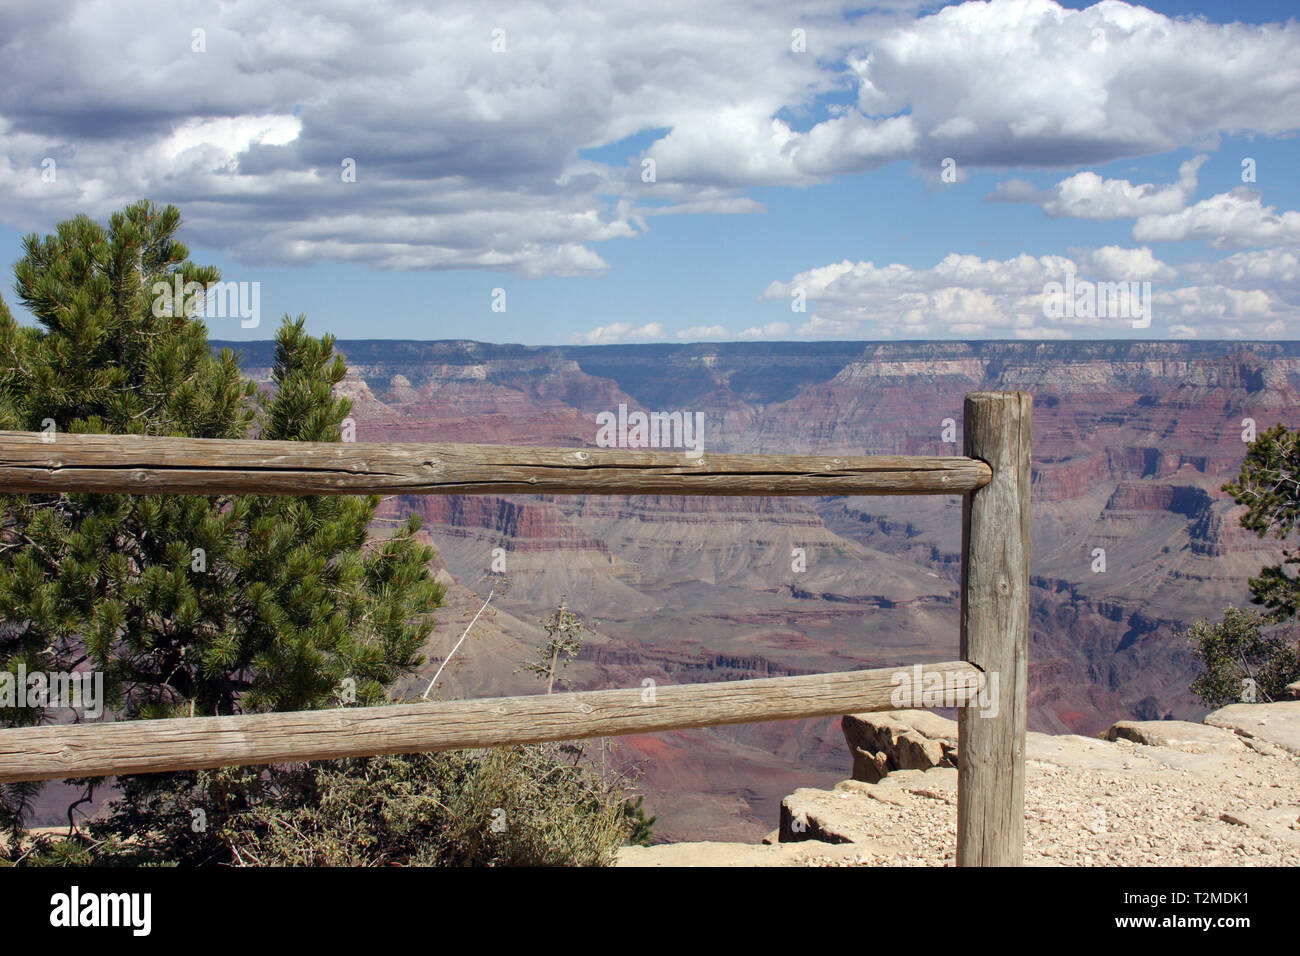 Overlook of the Grand Canyon against a blue cloudy sky Stock Photo